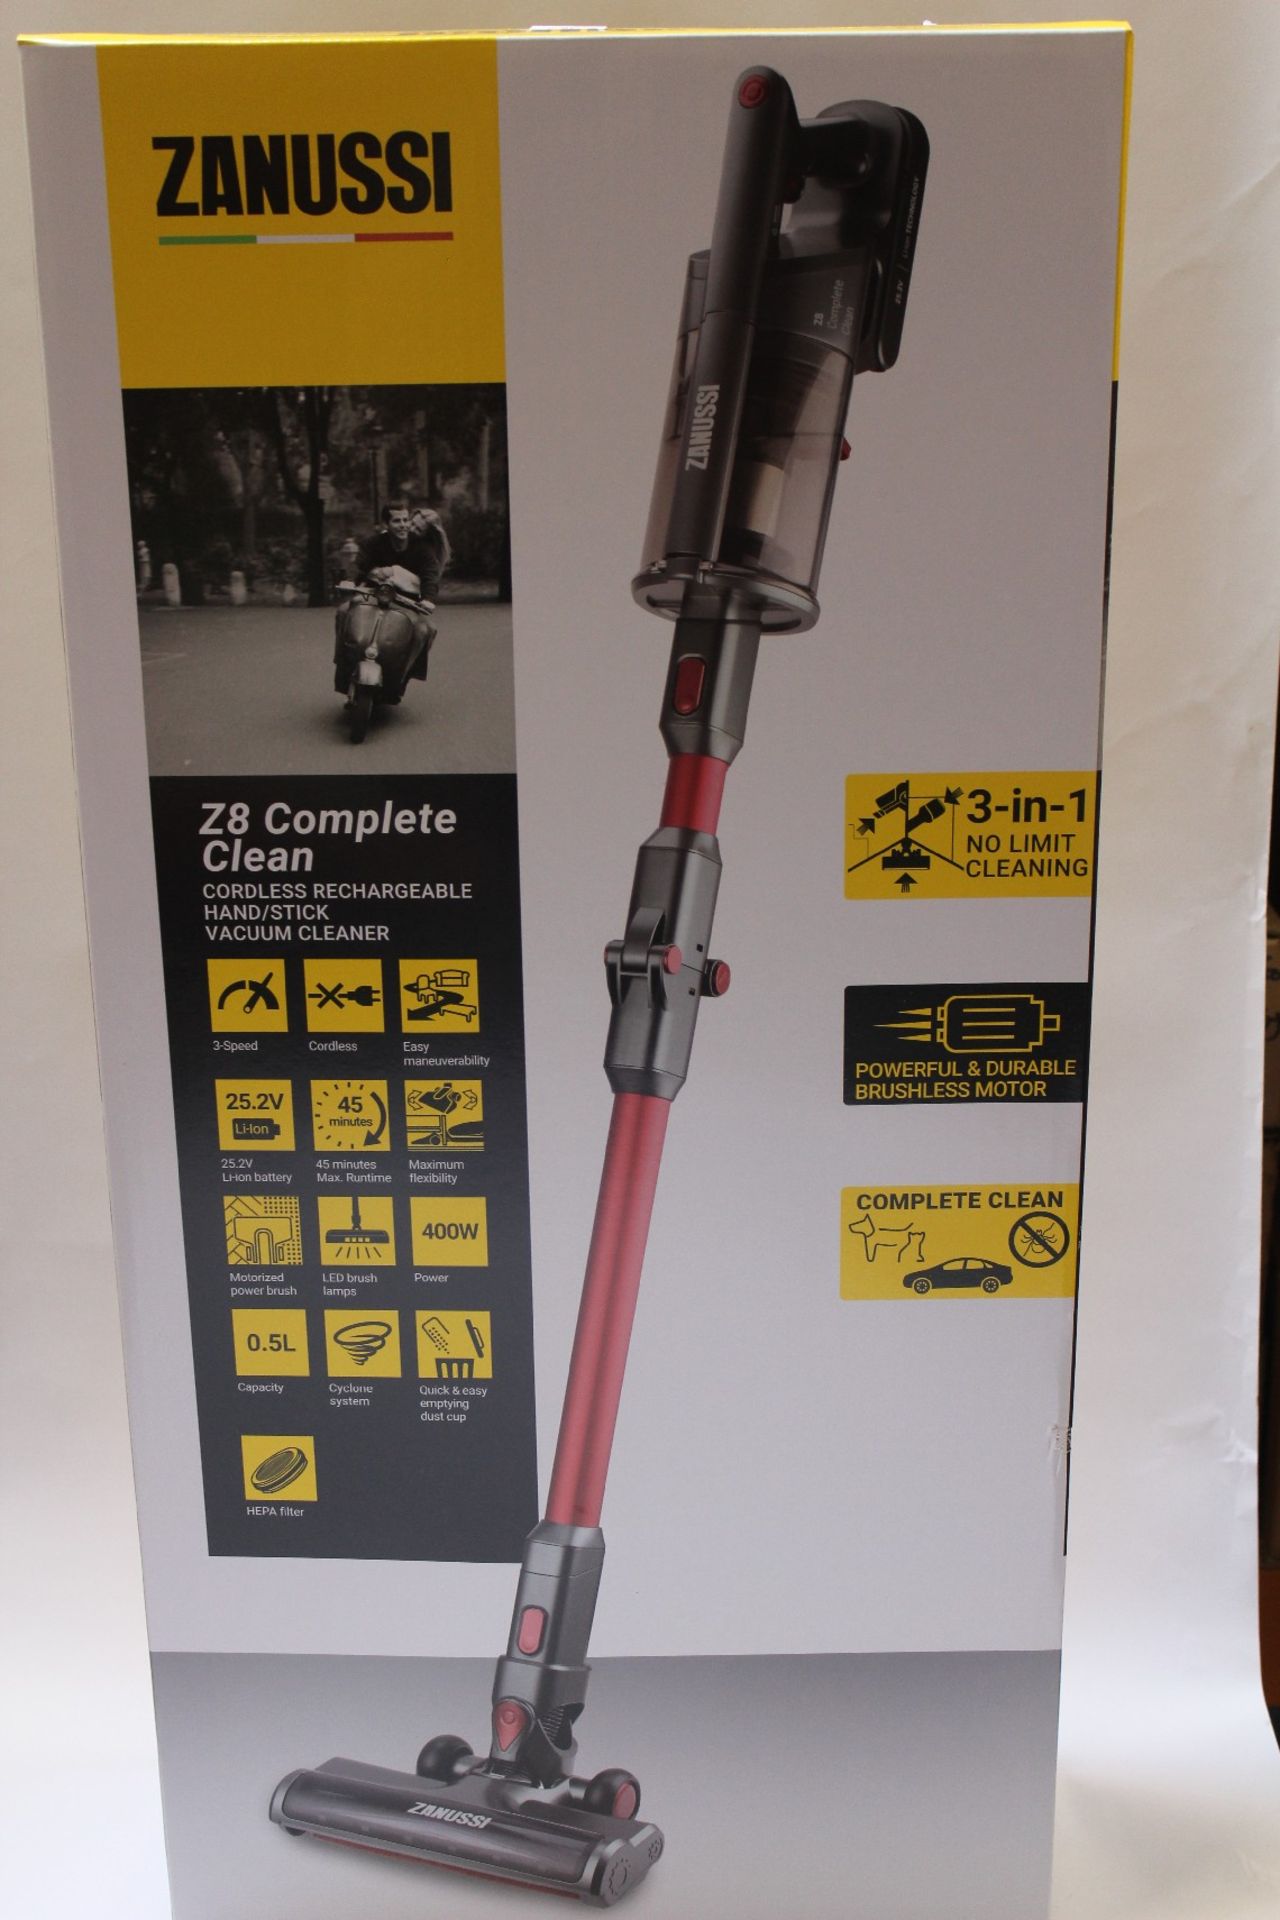 A new Zanussi Red Z8 Complete Clean cordless rechargeable 400W, 0.05L foldable vacuum cleaner (